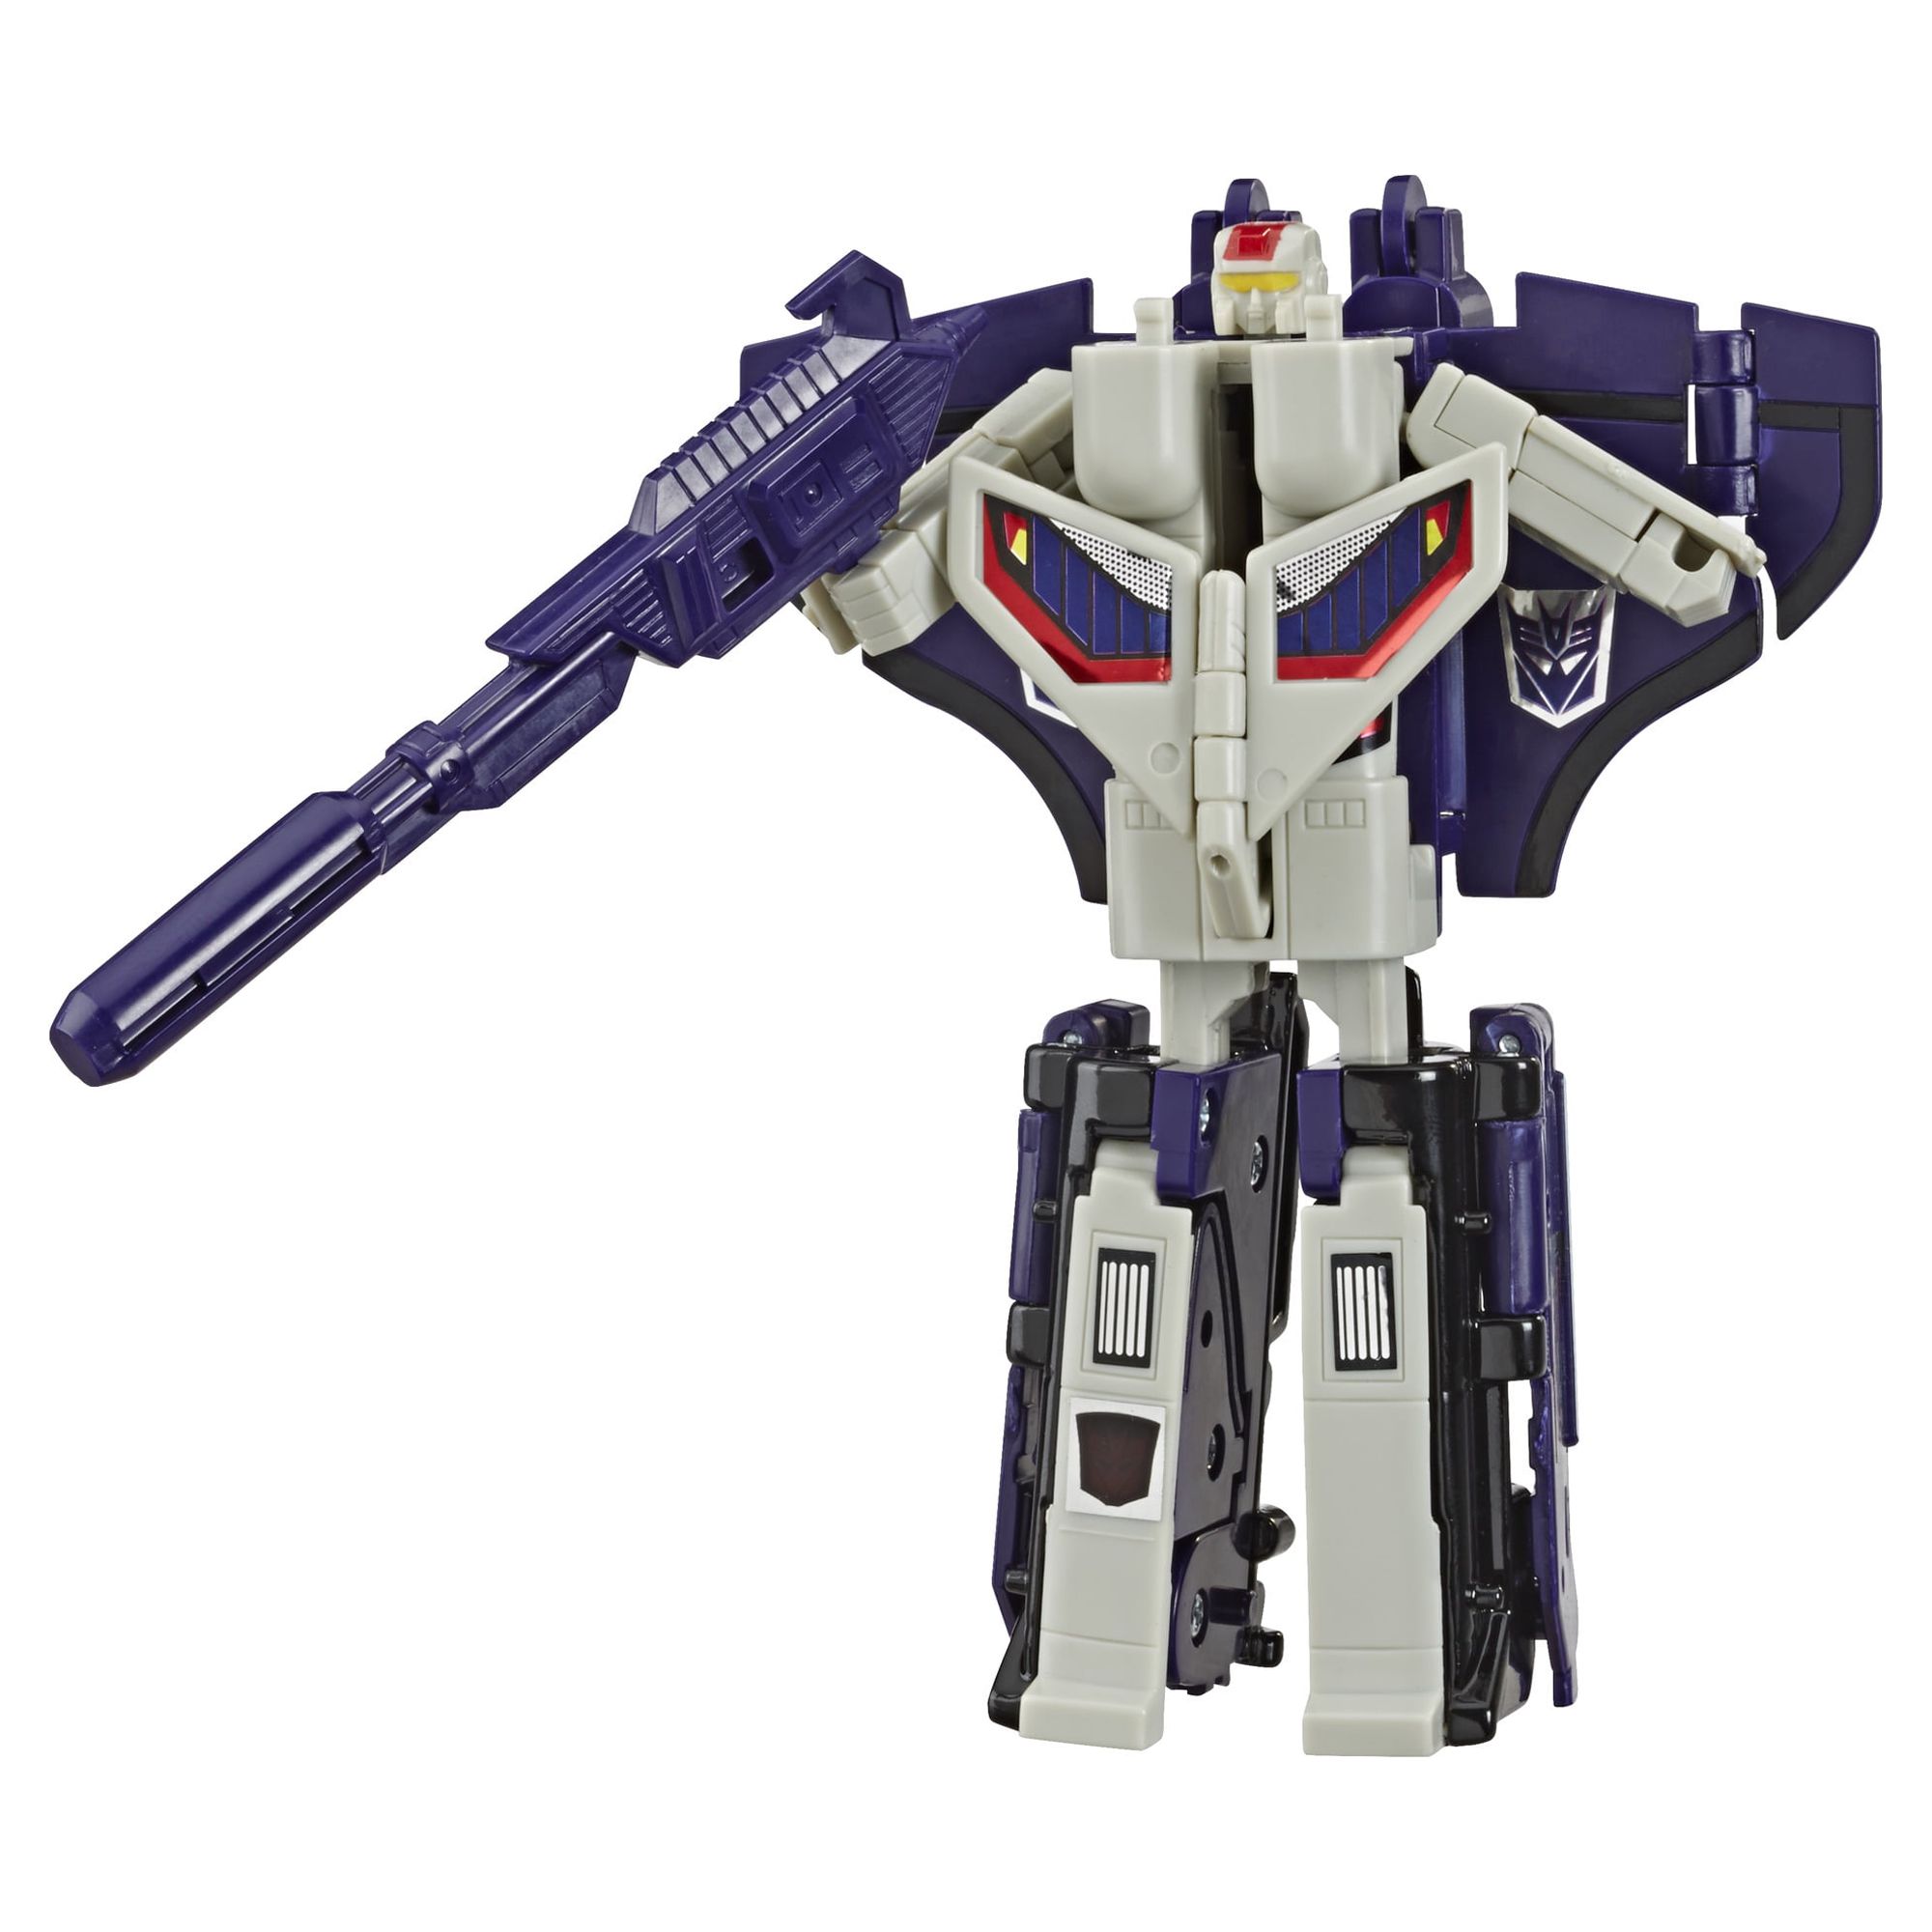 Transformers Toys Vintage G1 Astrotrain 4.5 Inch Action Figure Toy, Accessory - image 1 of 9